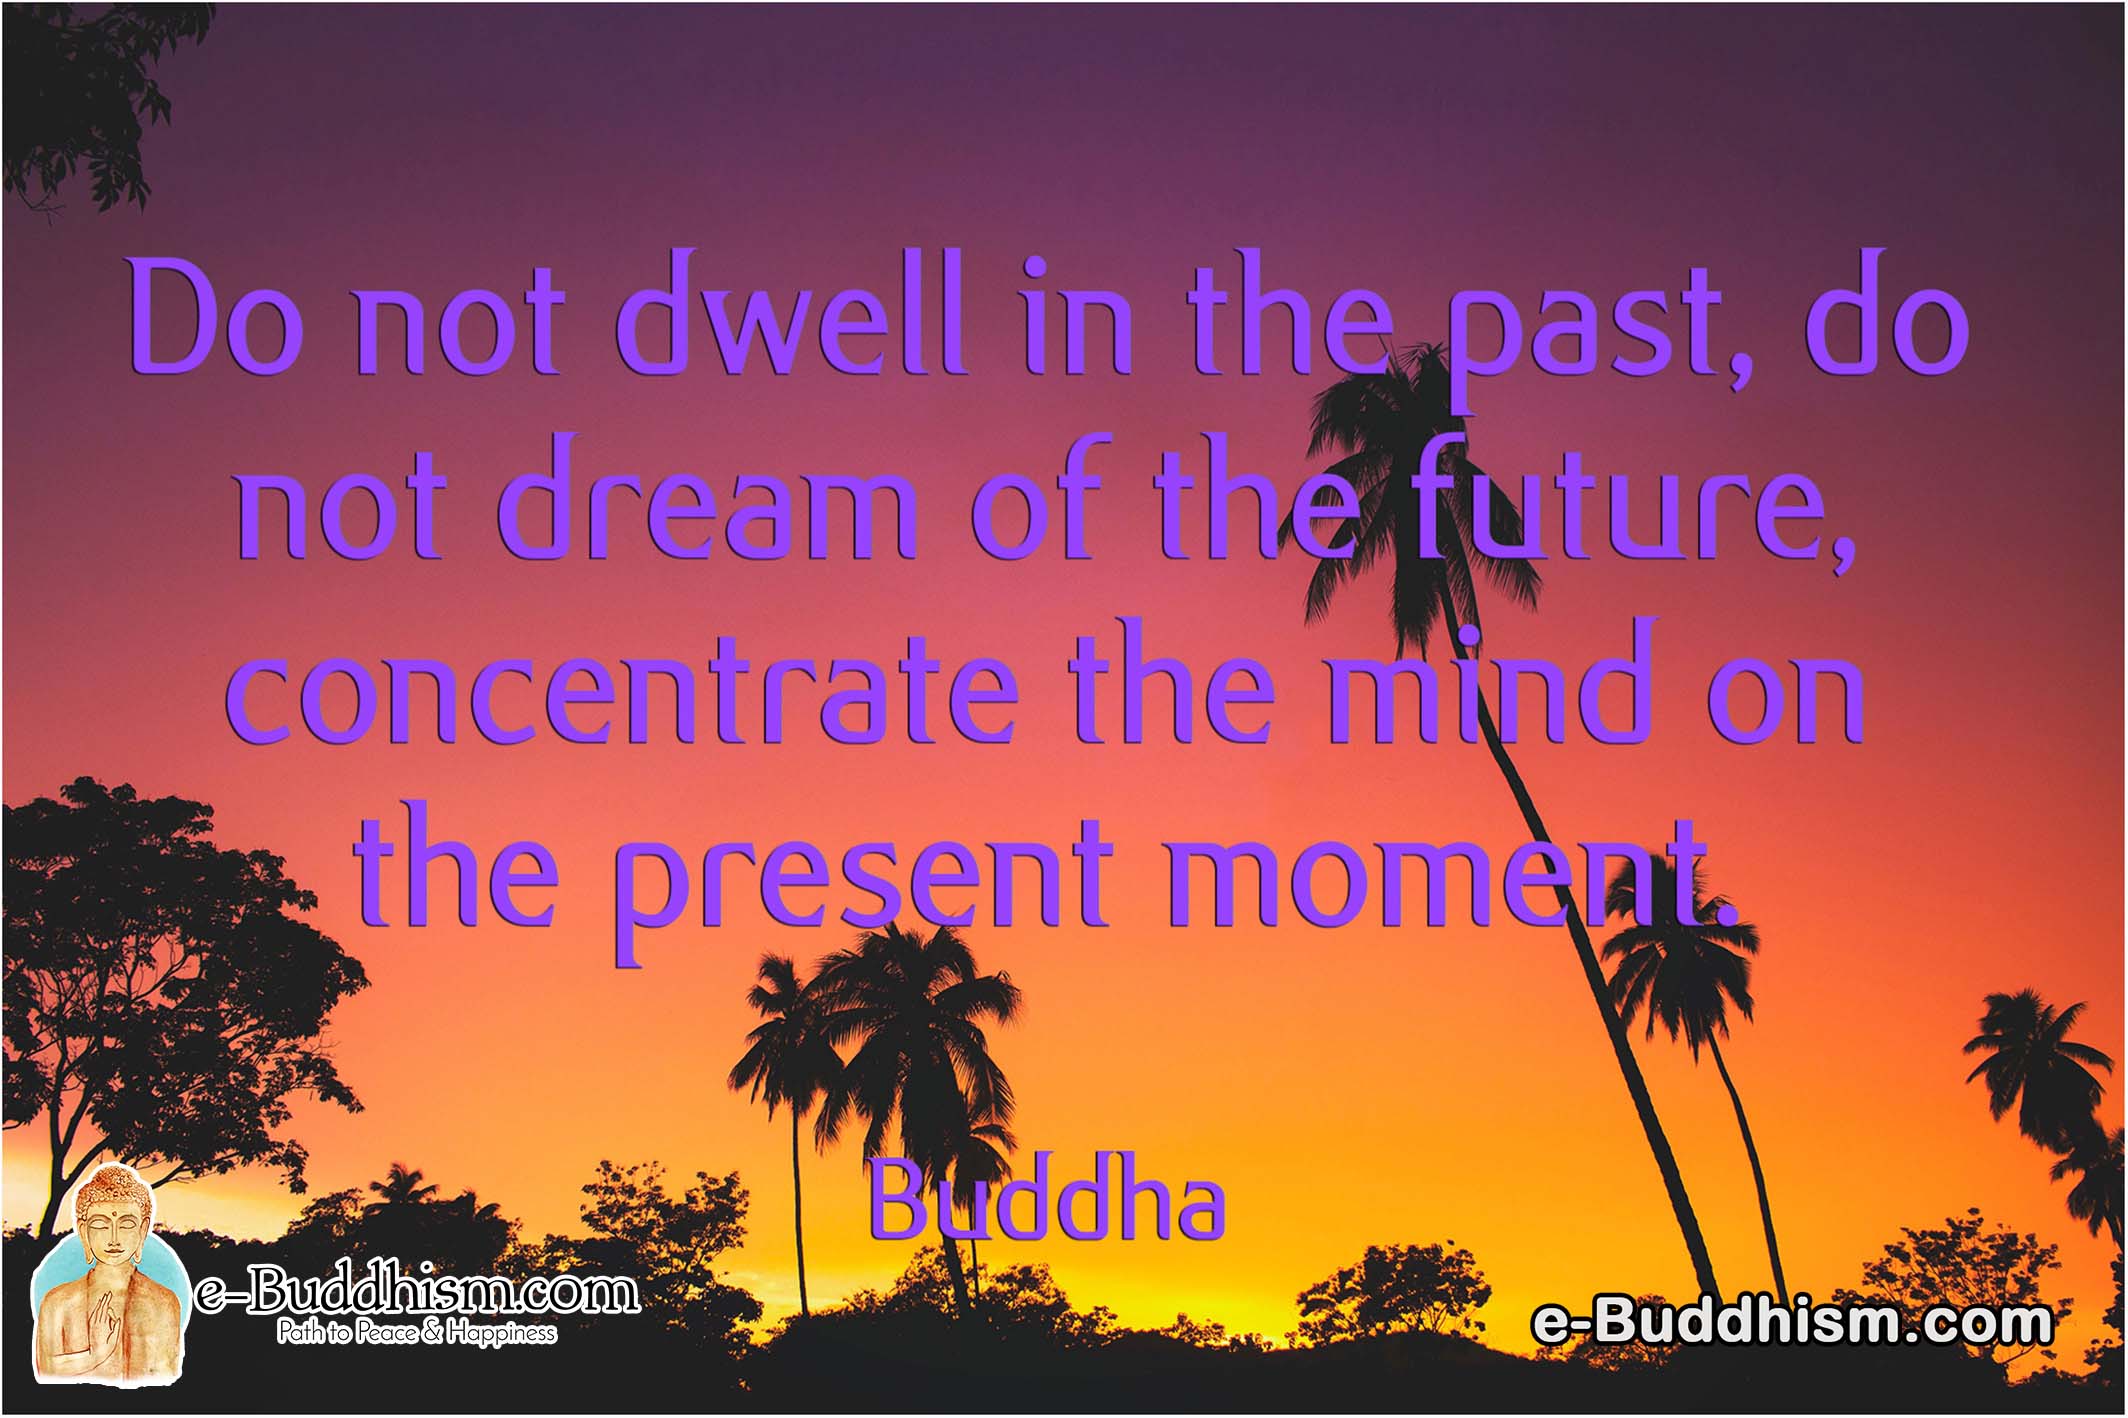 Do not dwell in the past, do not dream of the future, and concentrate the mind on the present moment. -Buddha